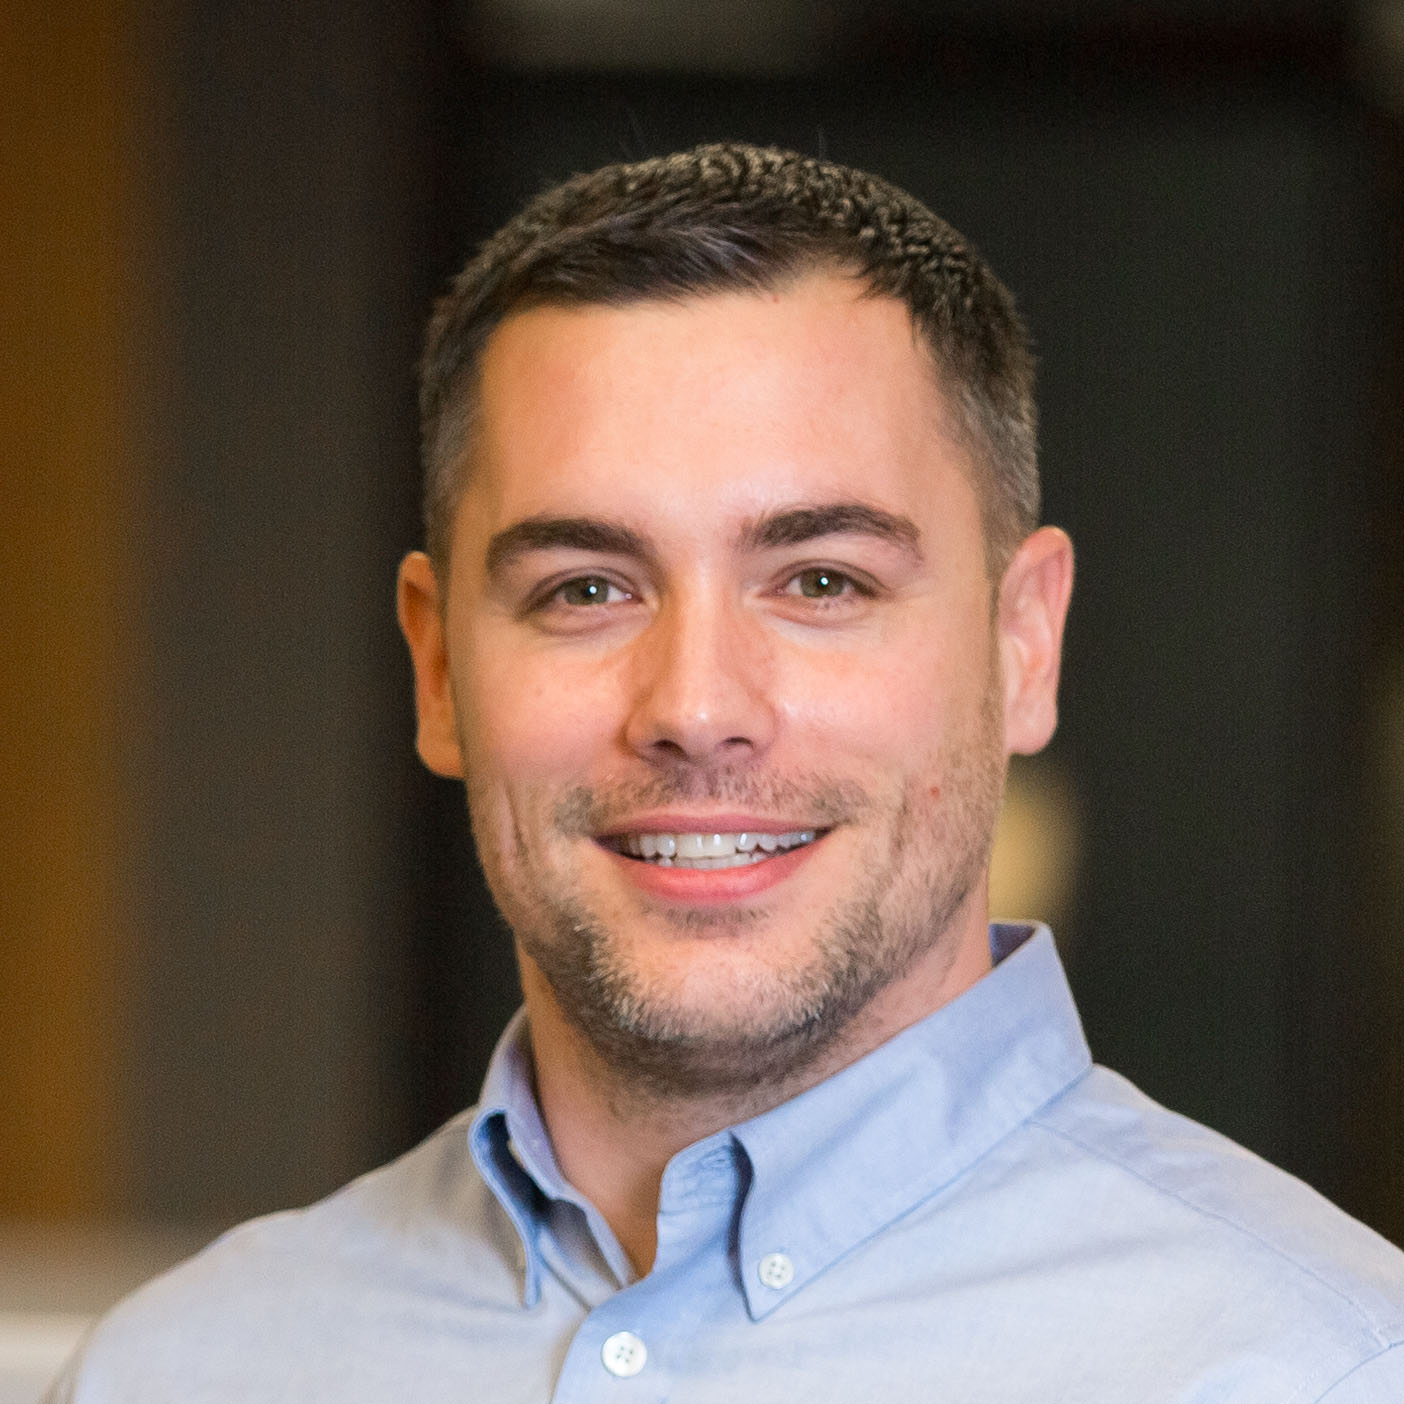 Gabe Antenucci is a higher education project manager at LaBella Associates.